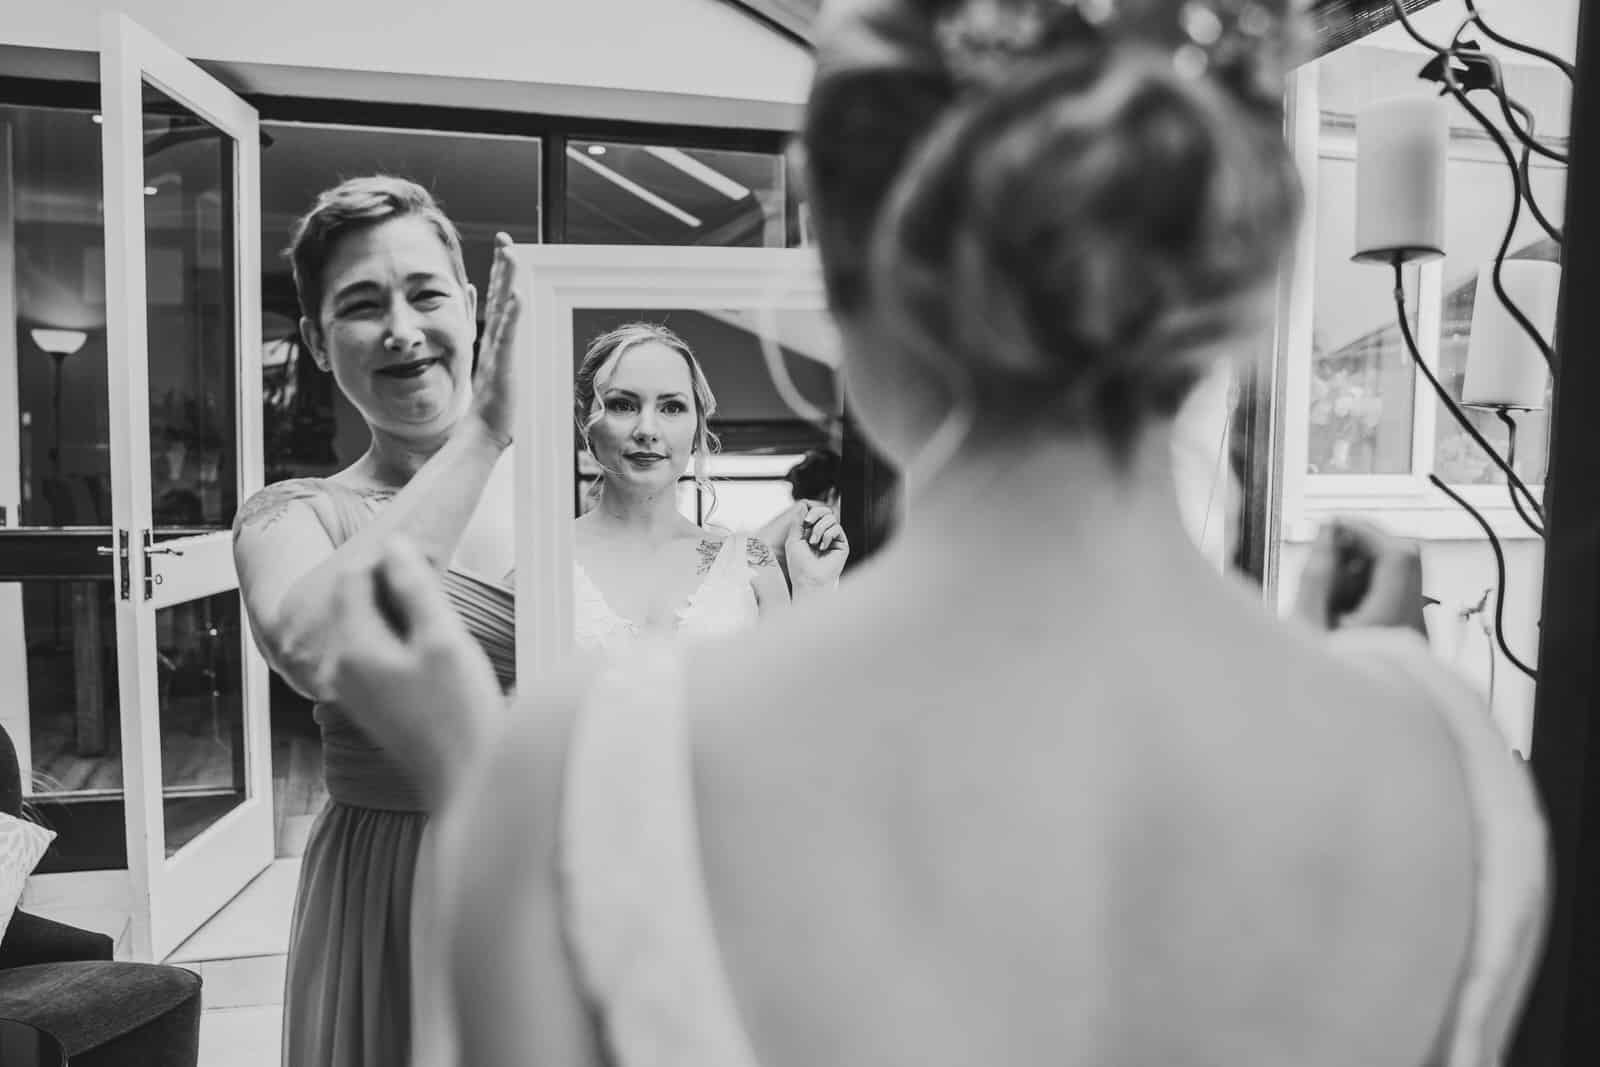 Bride seeing herself for the first time